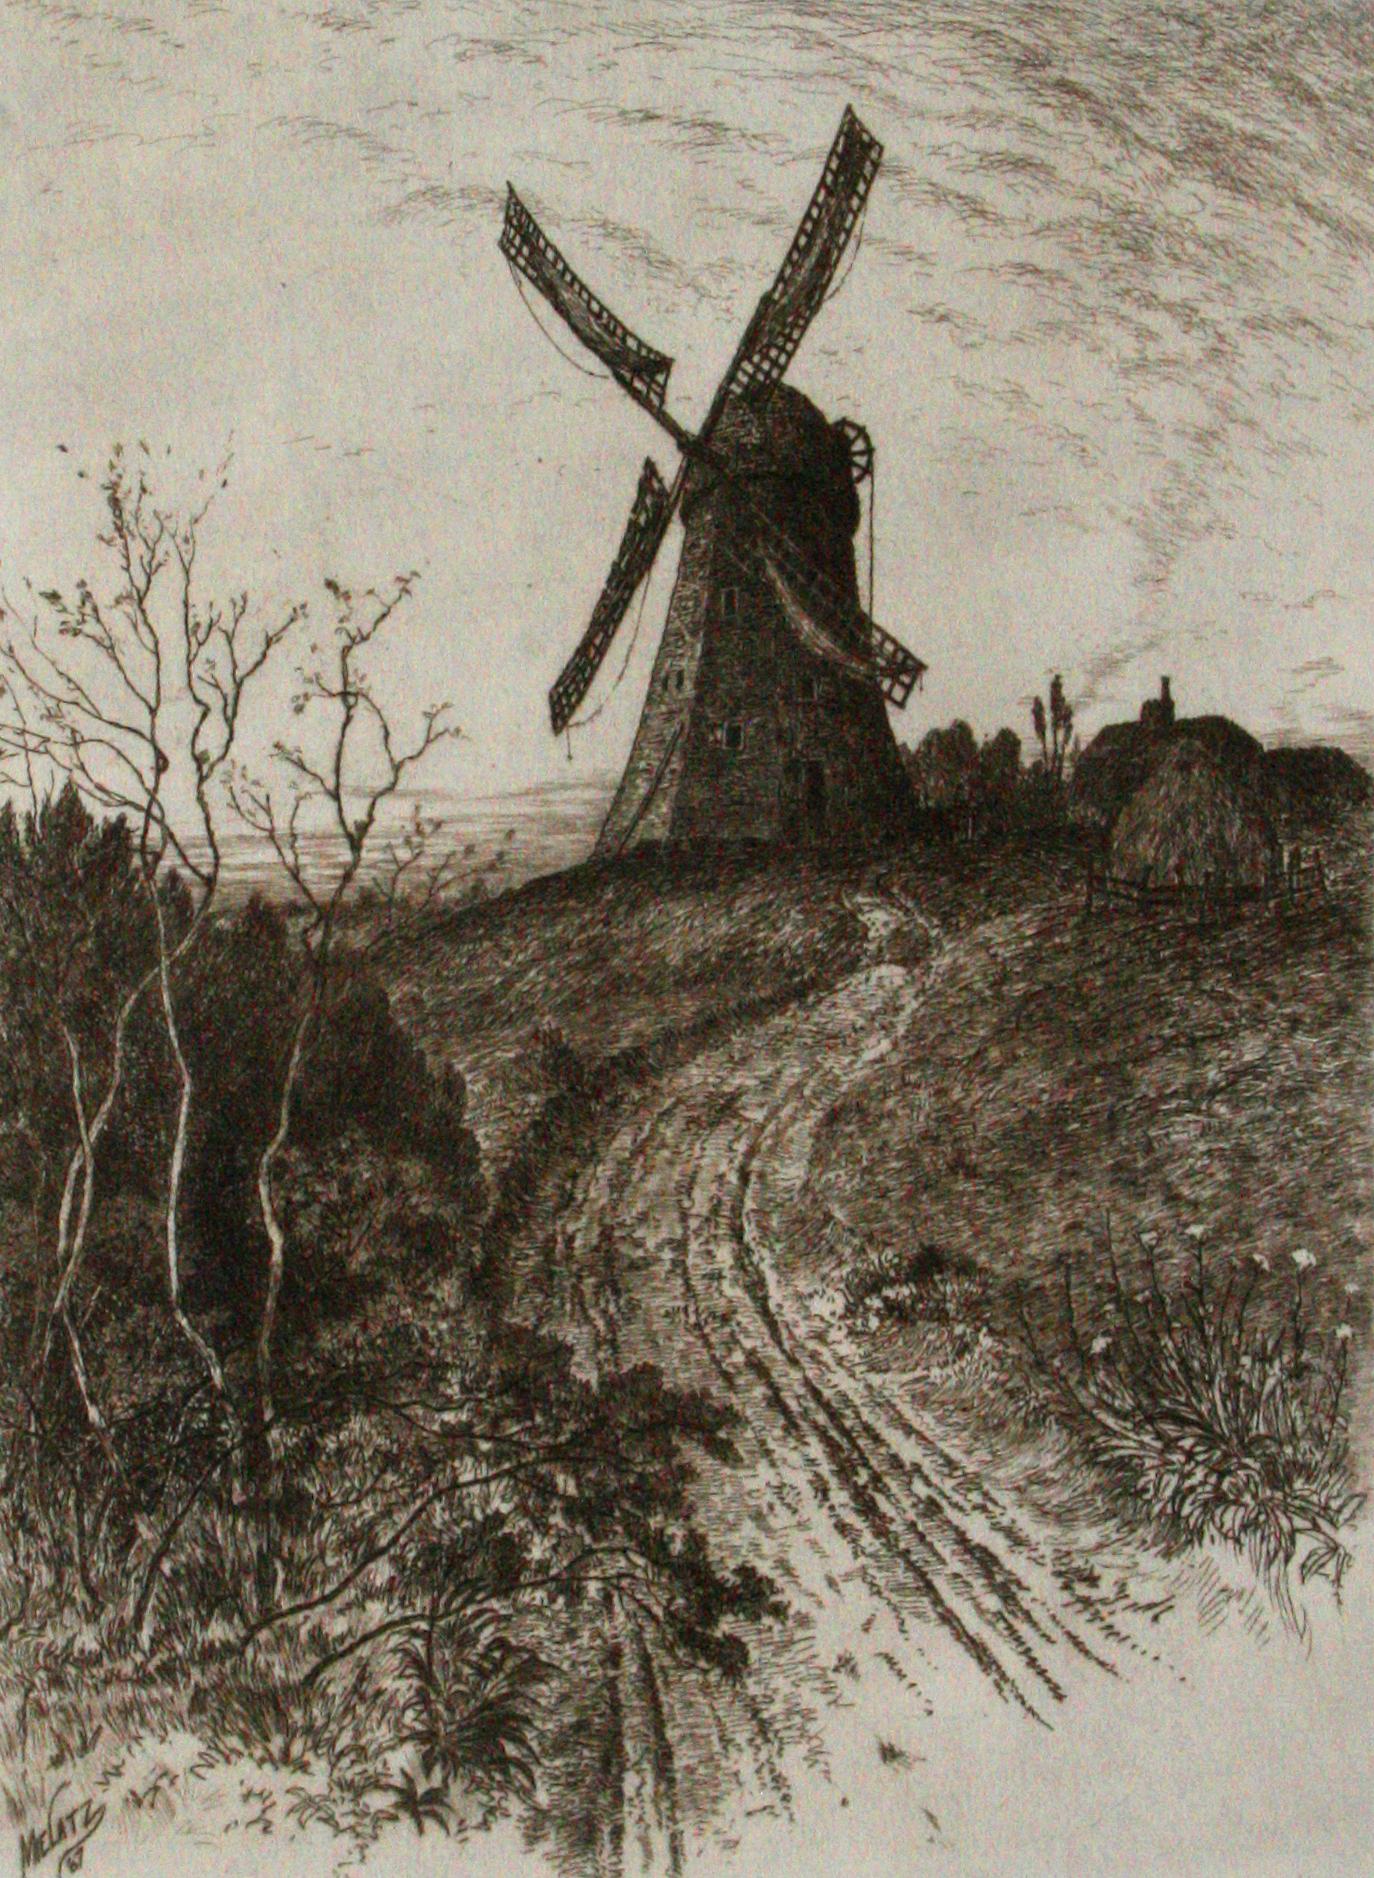 Old Mill near Newport. 1887. Etching.  9 1/4 x 6 3/4 (sheet 12 7/8 x 9 5/8). As published by Frederick A. Stokes in Representative Etchings By Artists Of To-day In America. A fine impression printed on cream wove paper with deckle full margins.